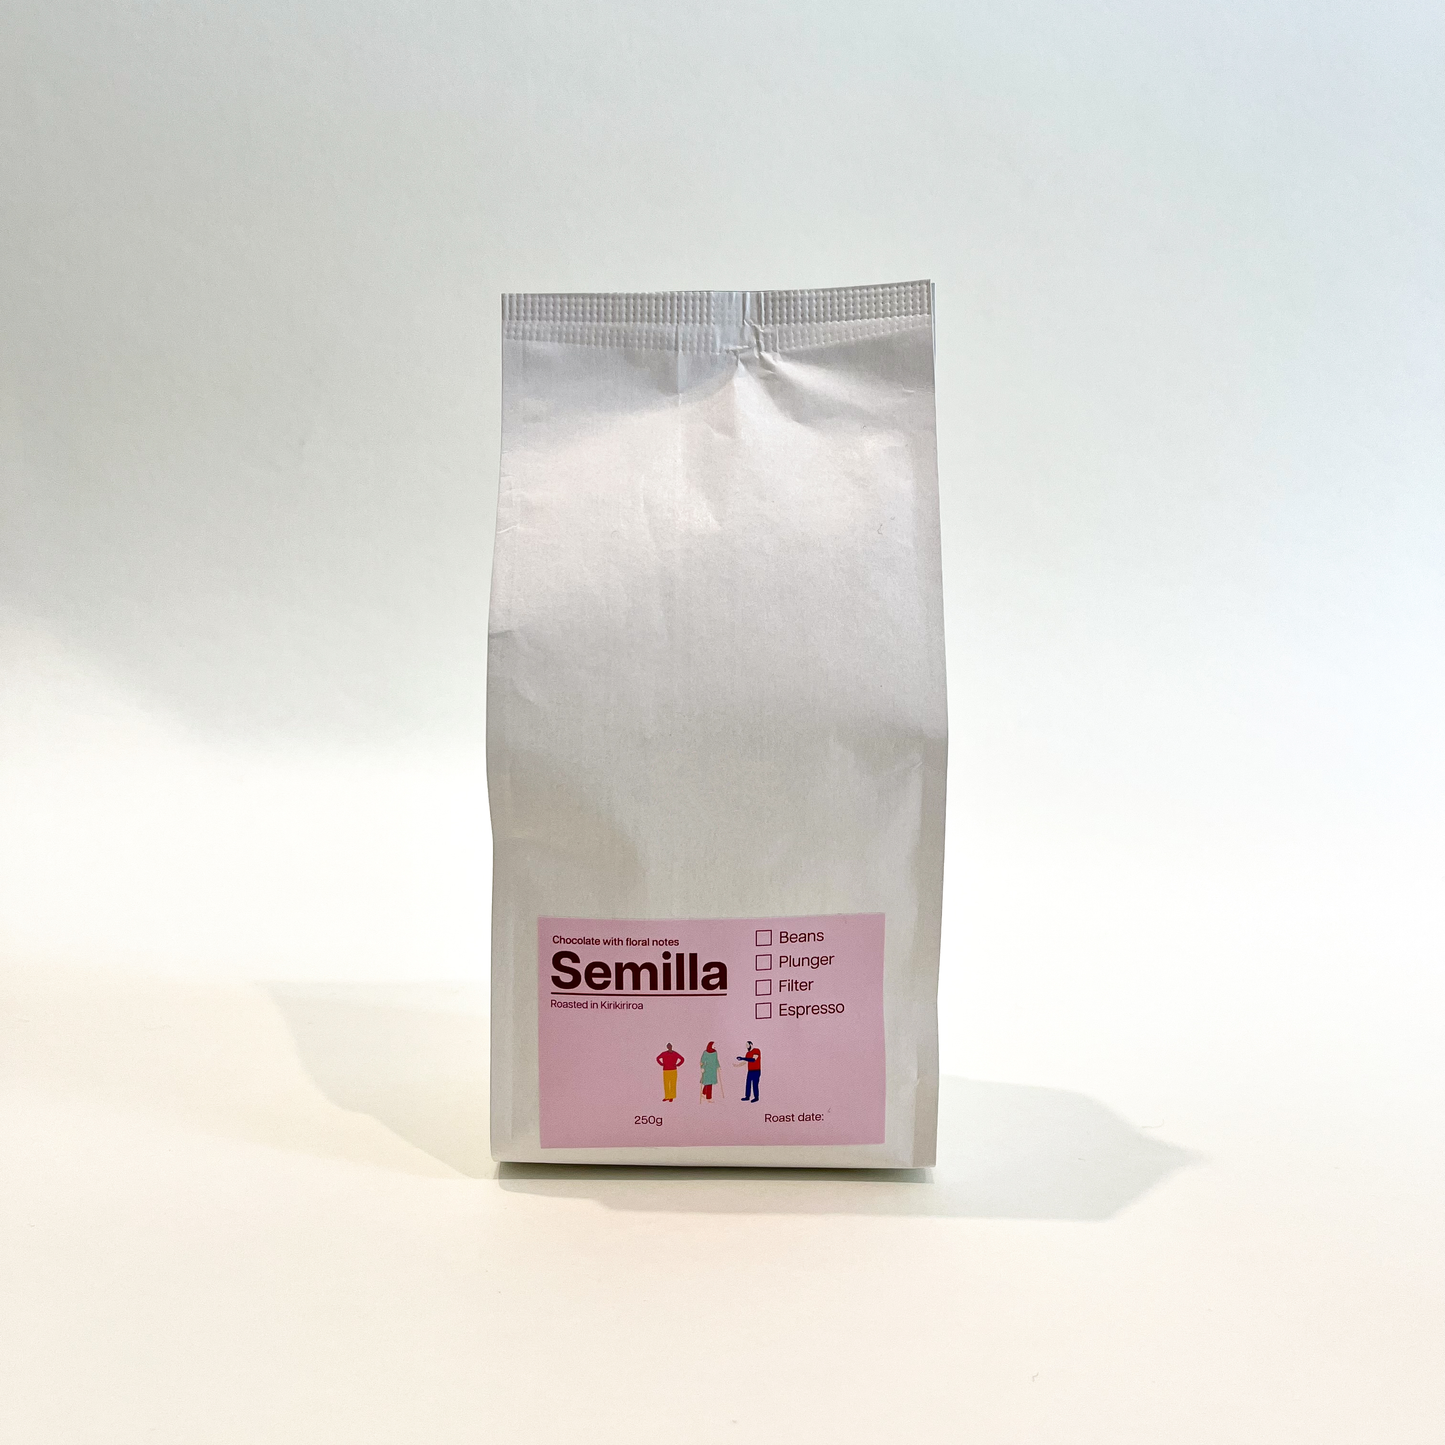 A white bag of TLF Semilla coffee with a pink label.